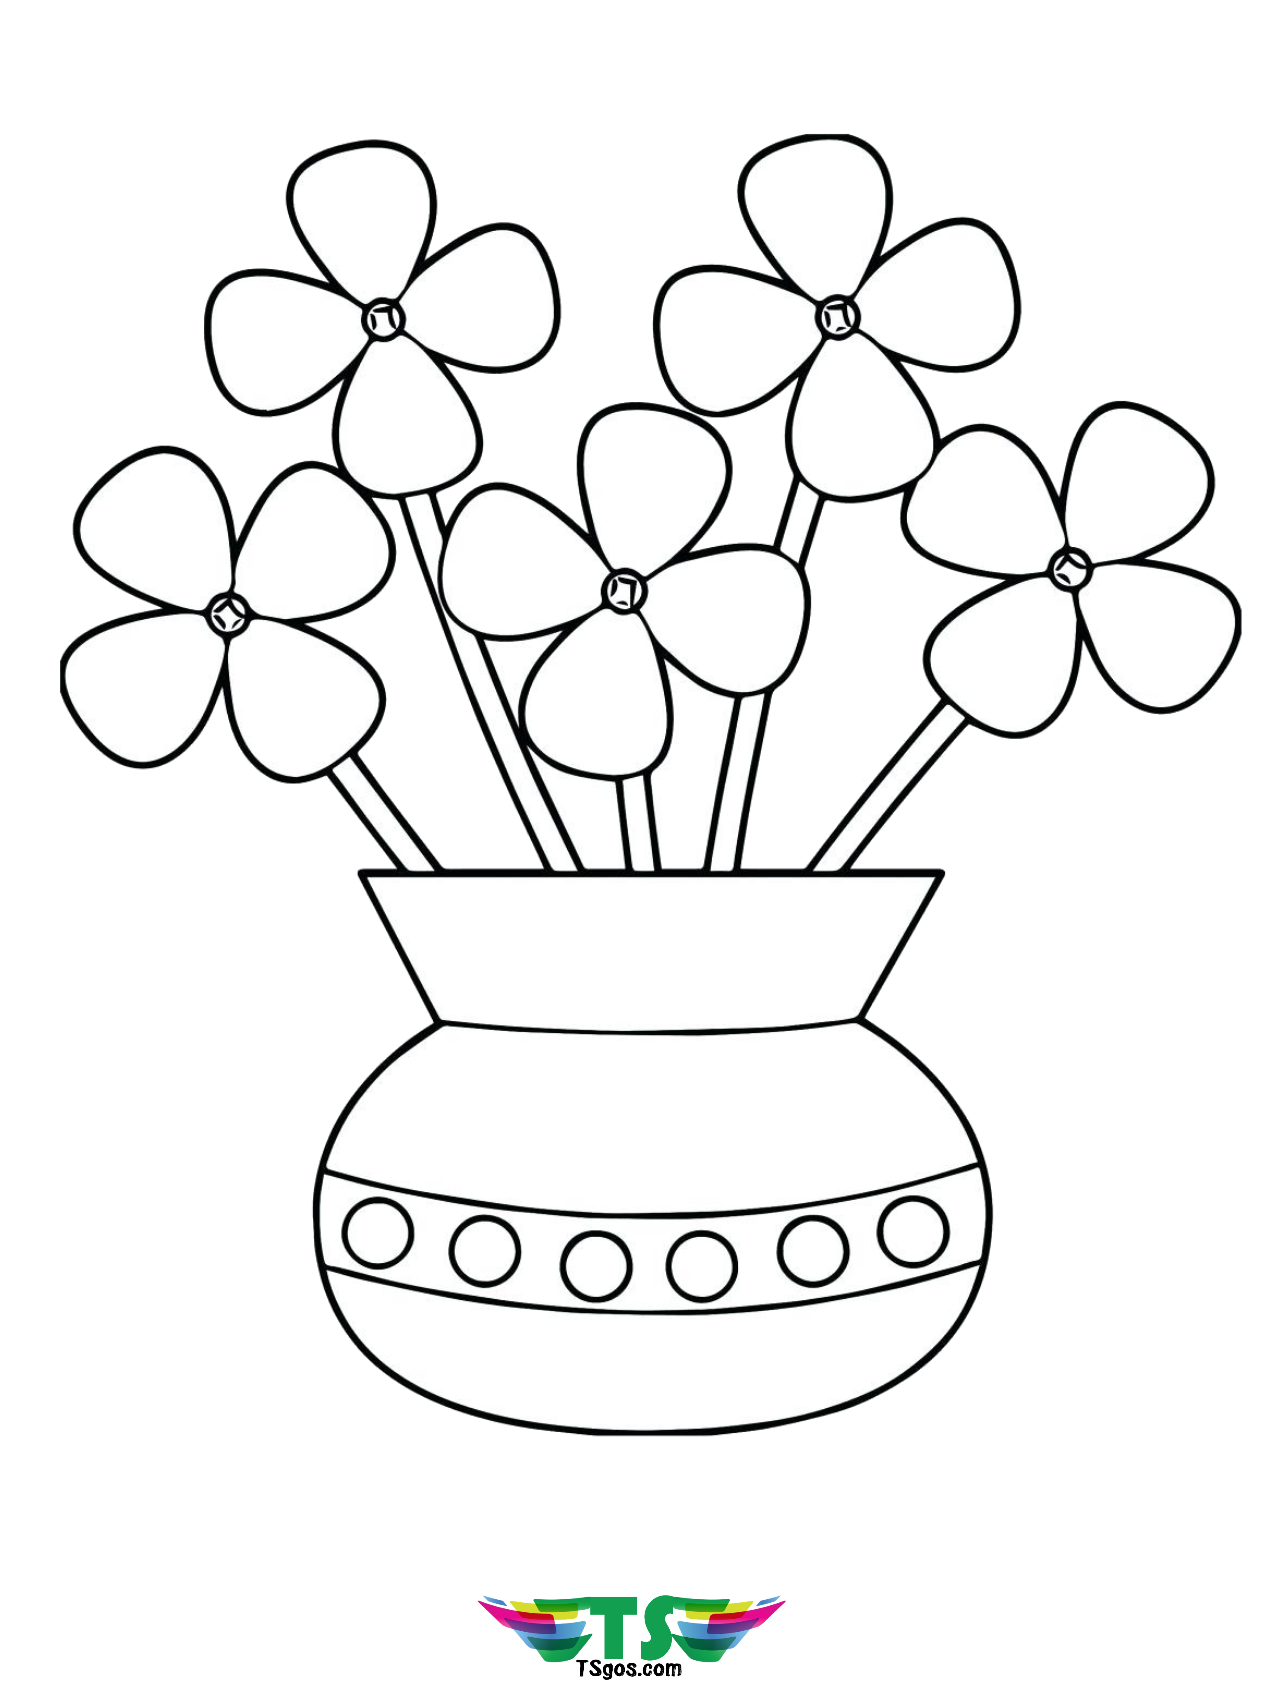 Printable Flowers in a Vase Coloring Page - TSgos.com